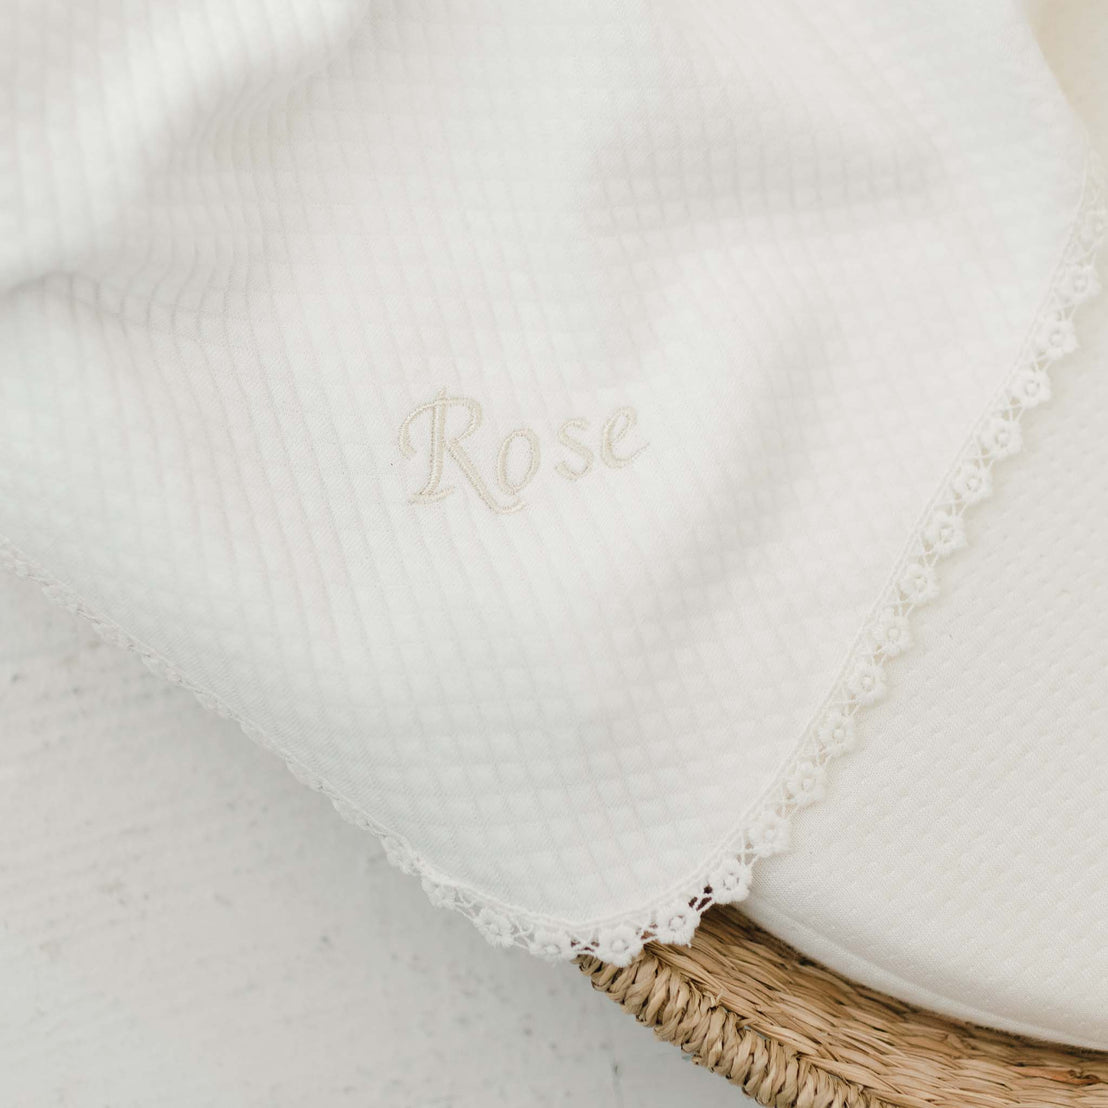 A white, textured Rose Personalized Blanket with the name "Rose" embroidered in elegant cursive, accented with a delicate lace trim, partially resting in a wicker basket on a light surface.